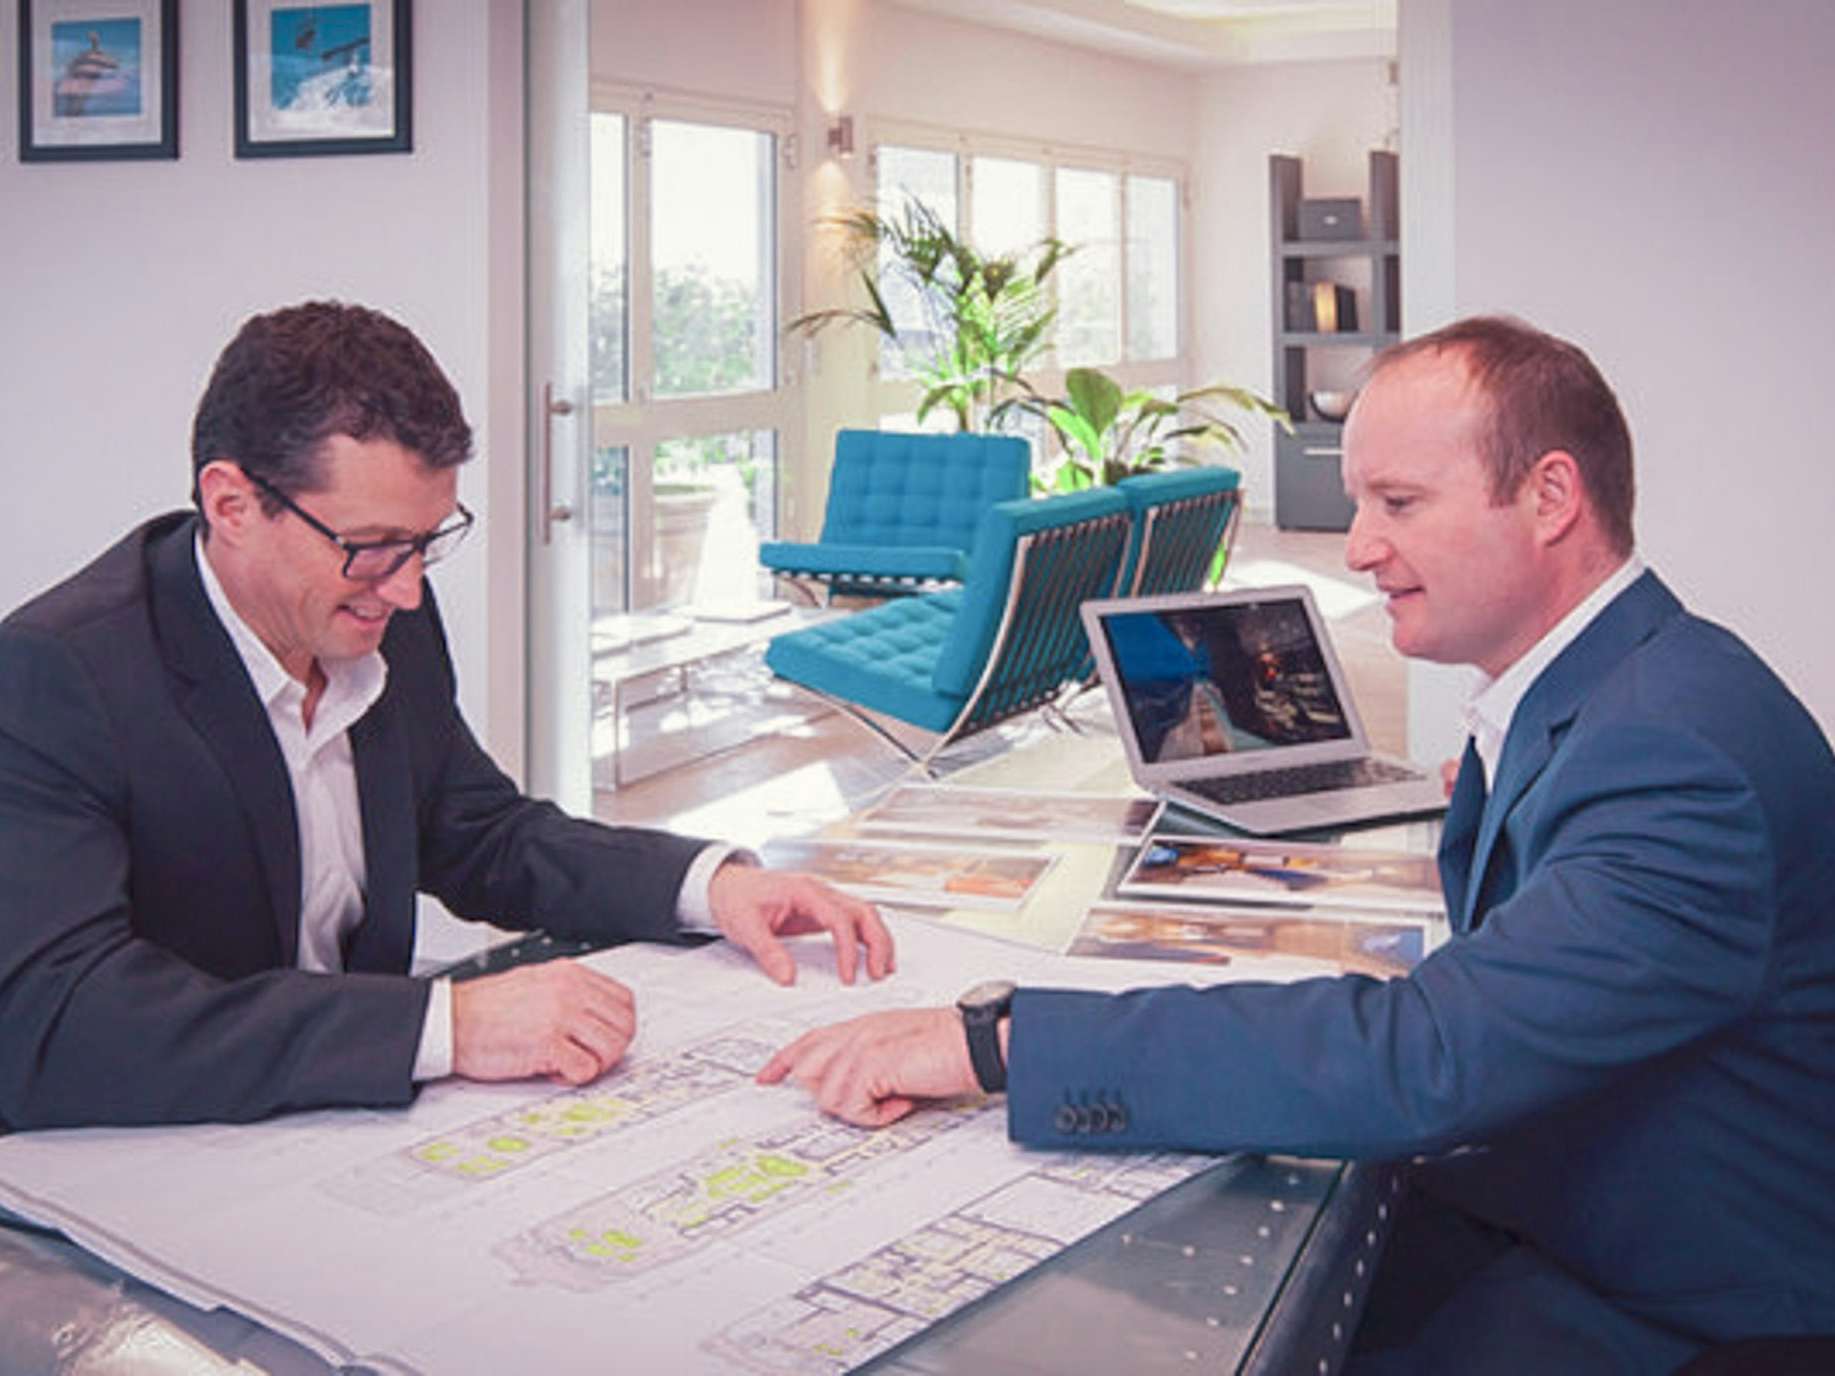 Yacht manager and client looking at yacht designs on desk